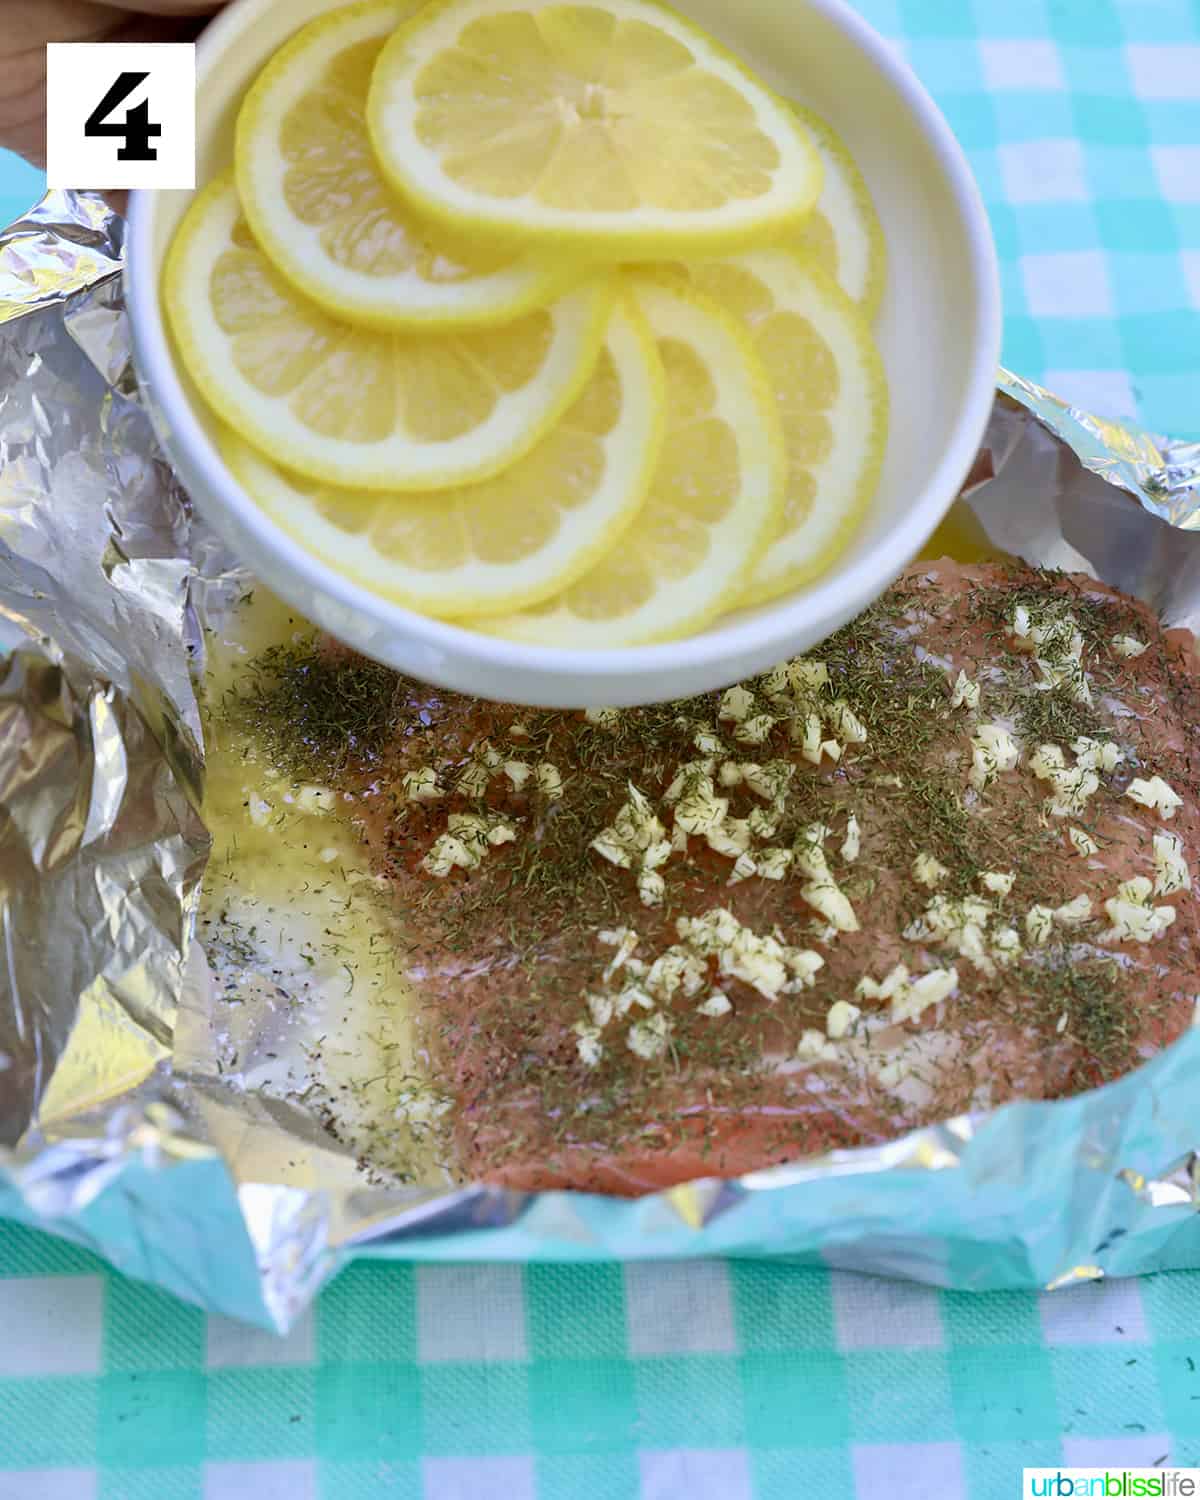 bowl of lemon slices above garlic buttered salmon in foil on a checkered tablecloth.